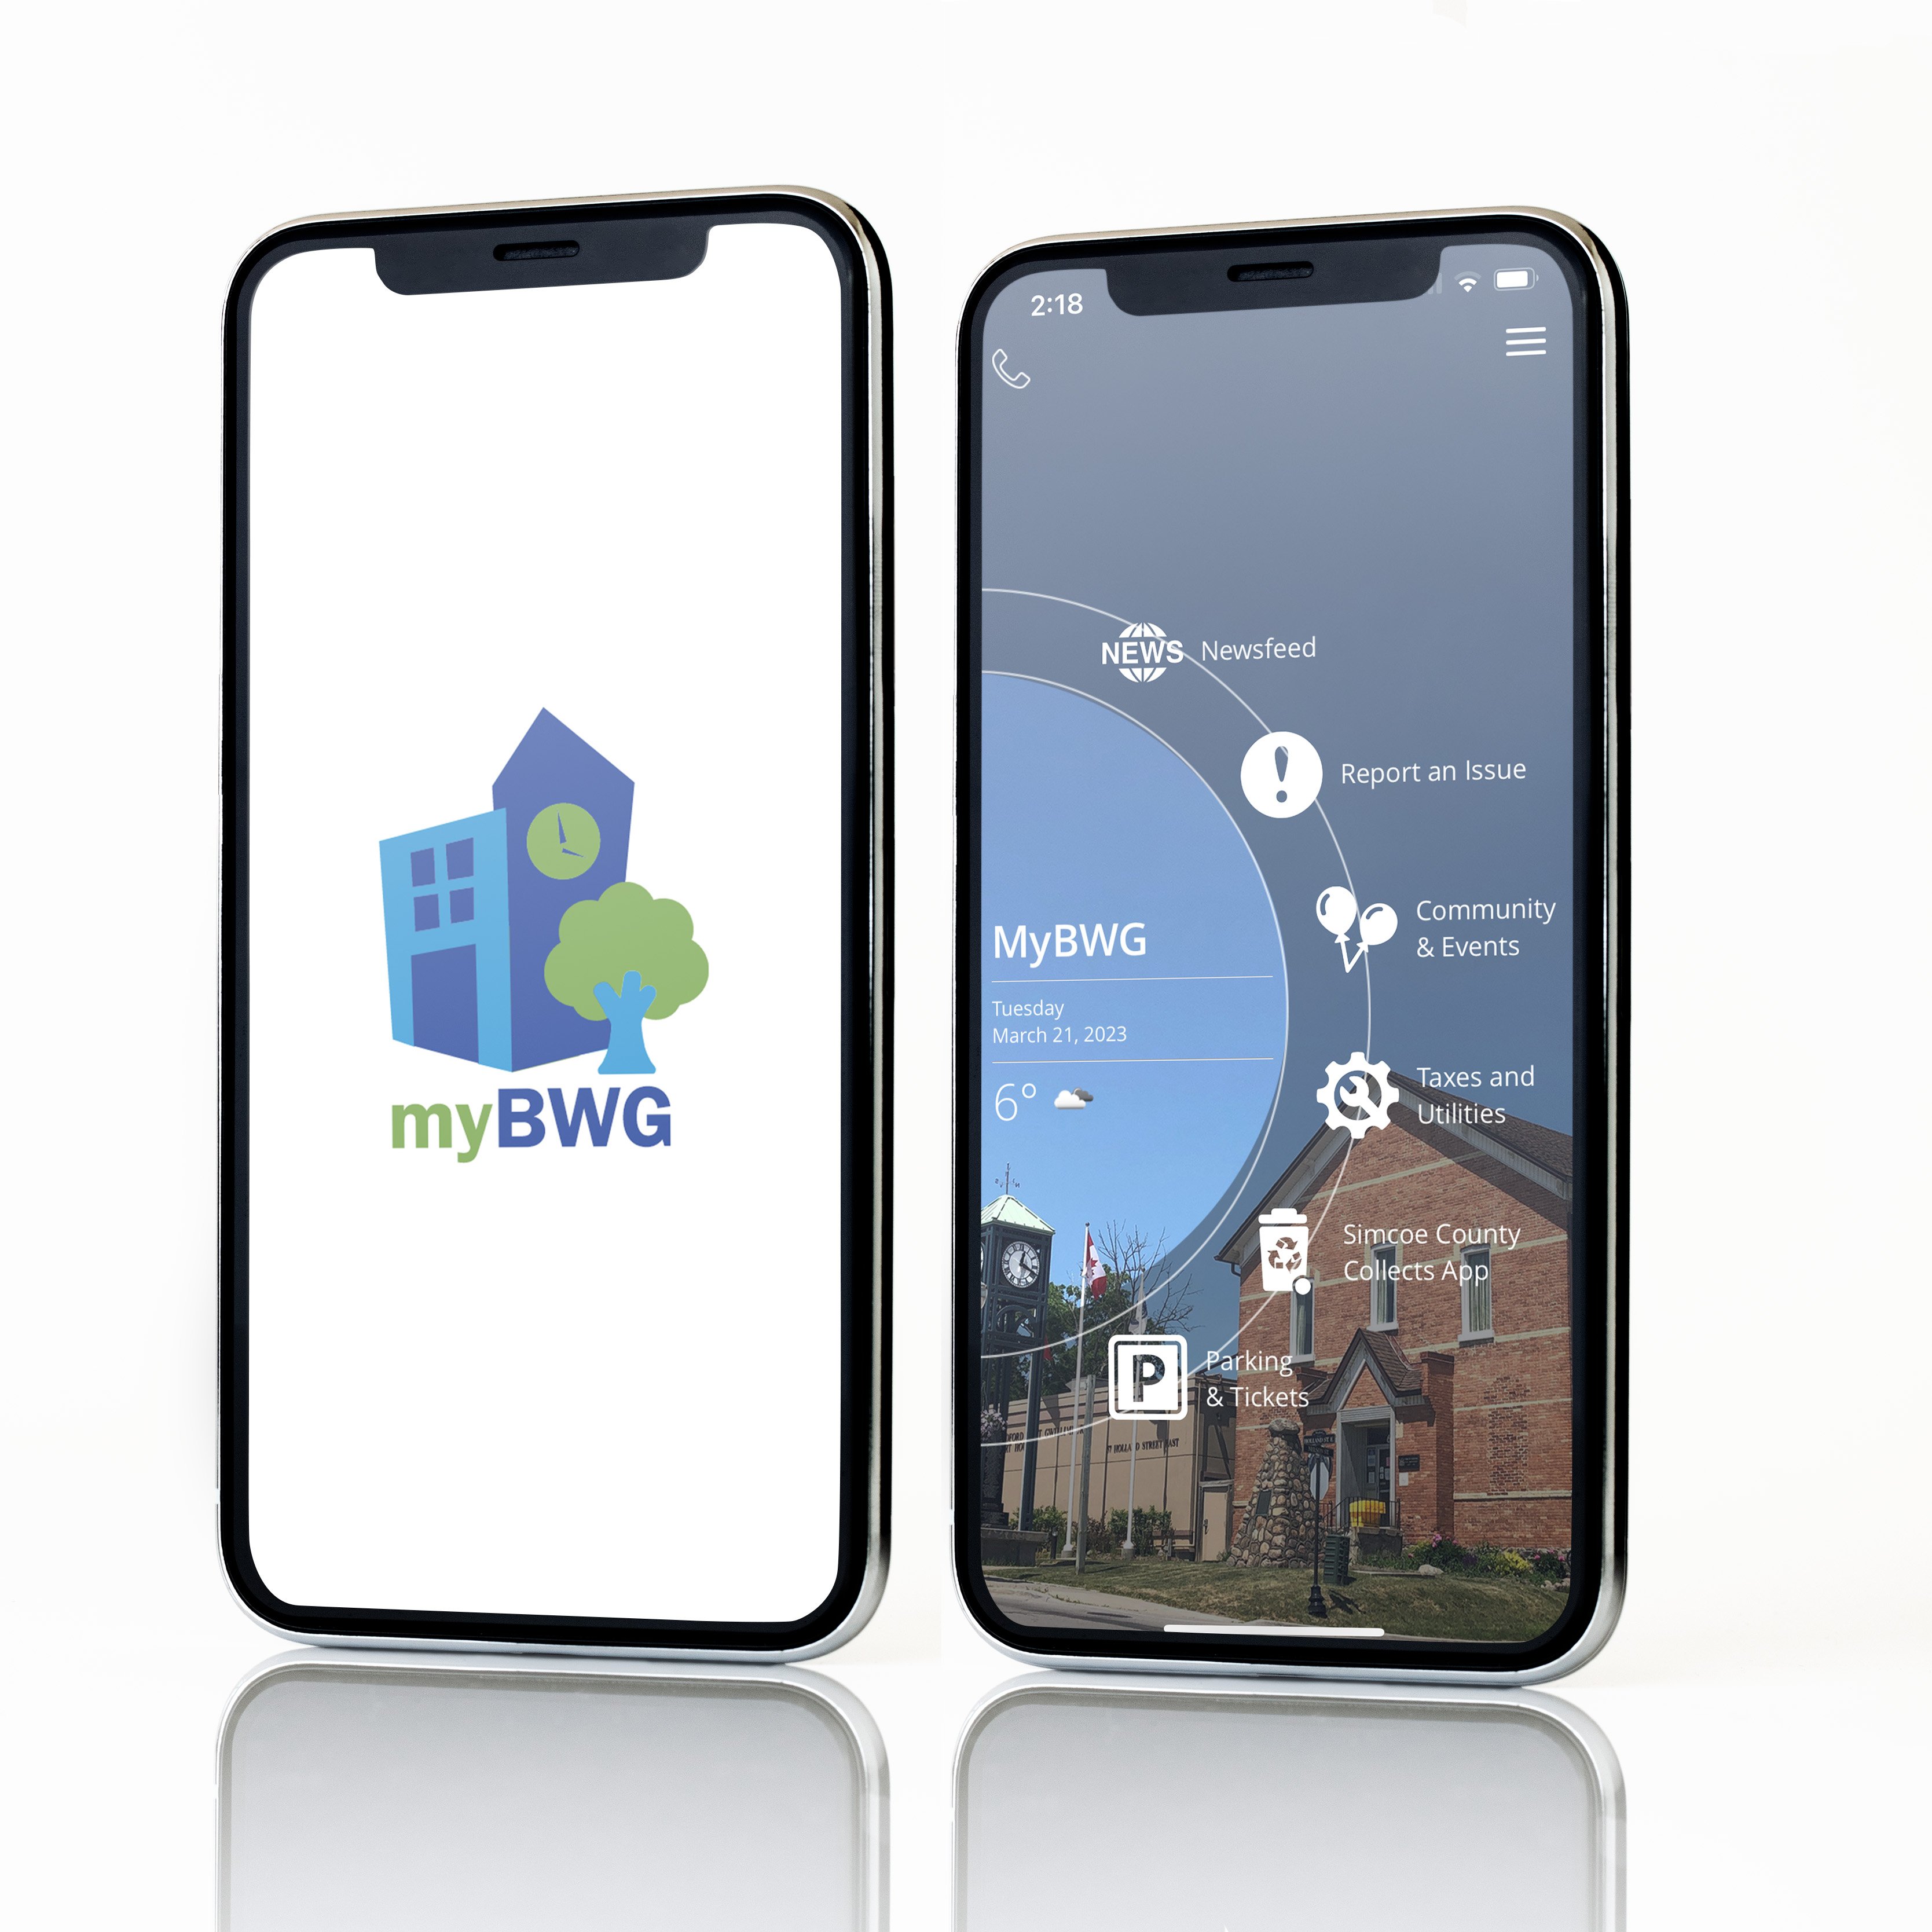 Two smart phones side by side, displaying the myBWG app